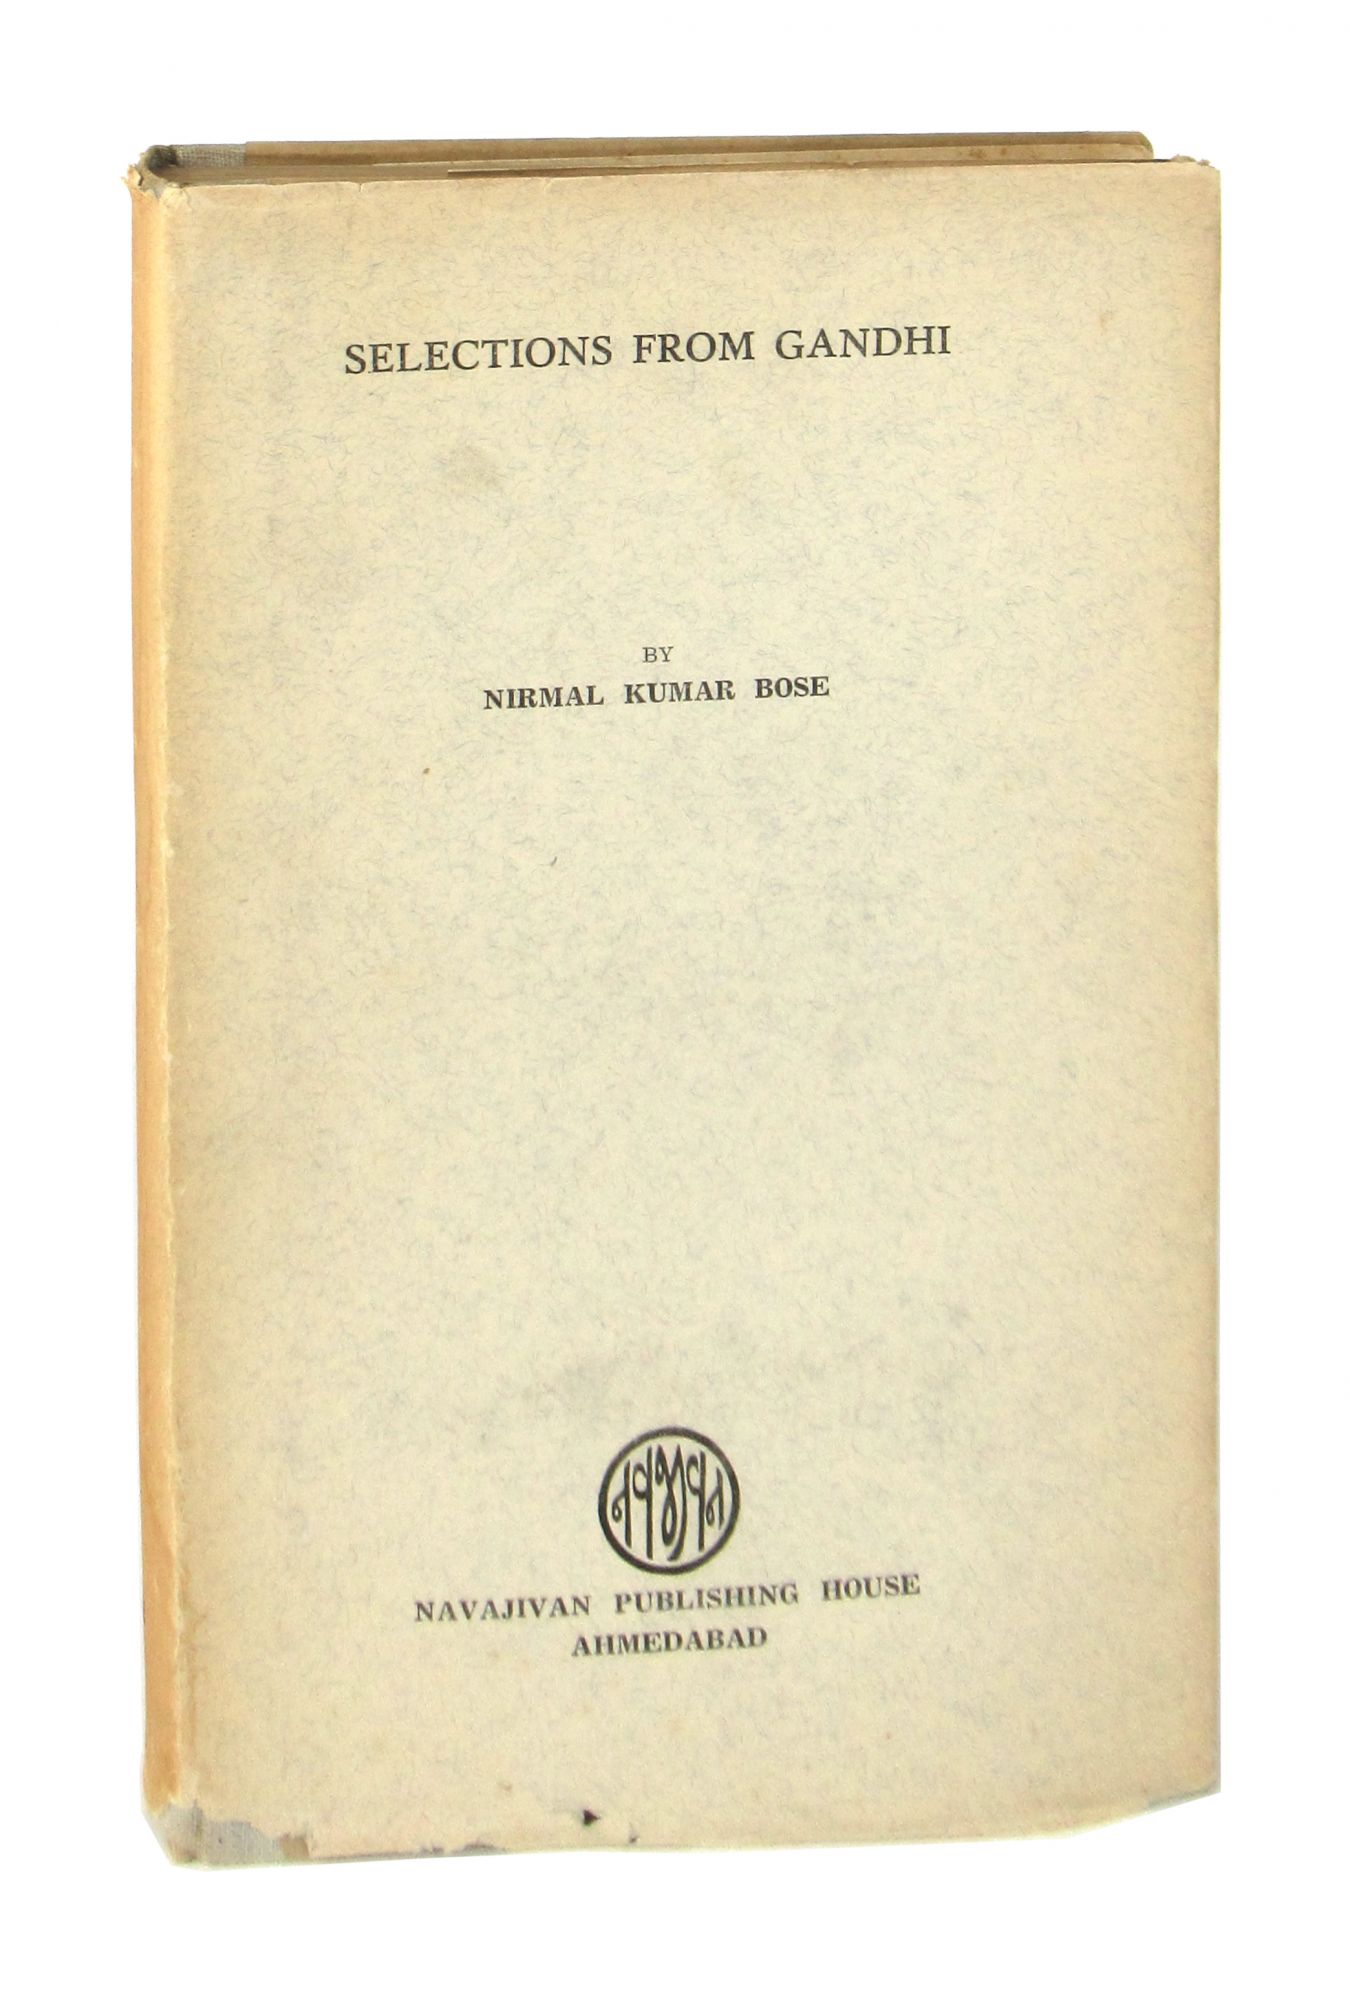 Selections from Gandhi by Nirmal Kumar Bose: Very Good (1948) | Capitol Hill Books, ABAA